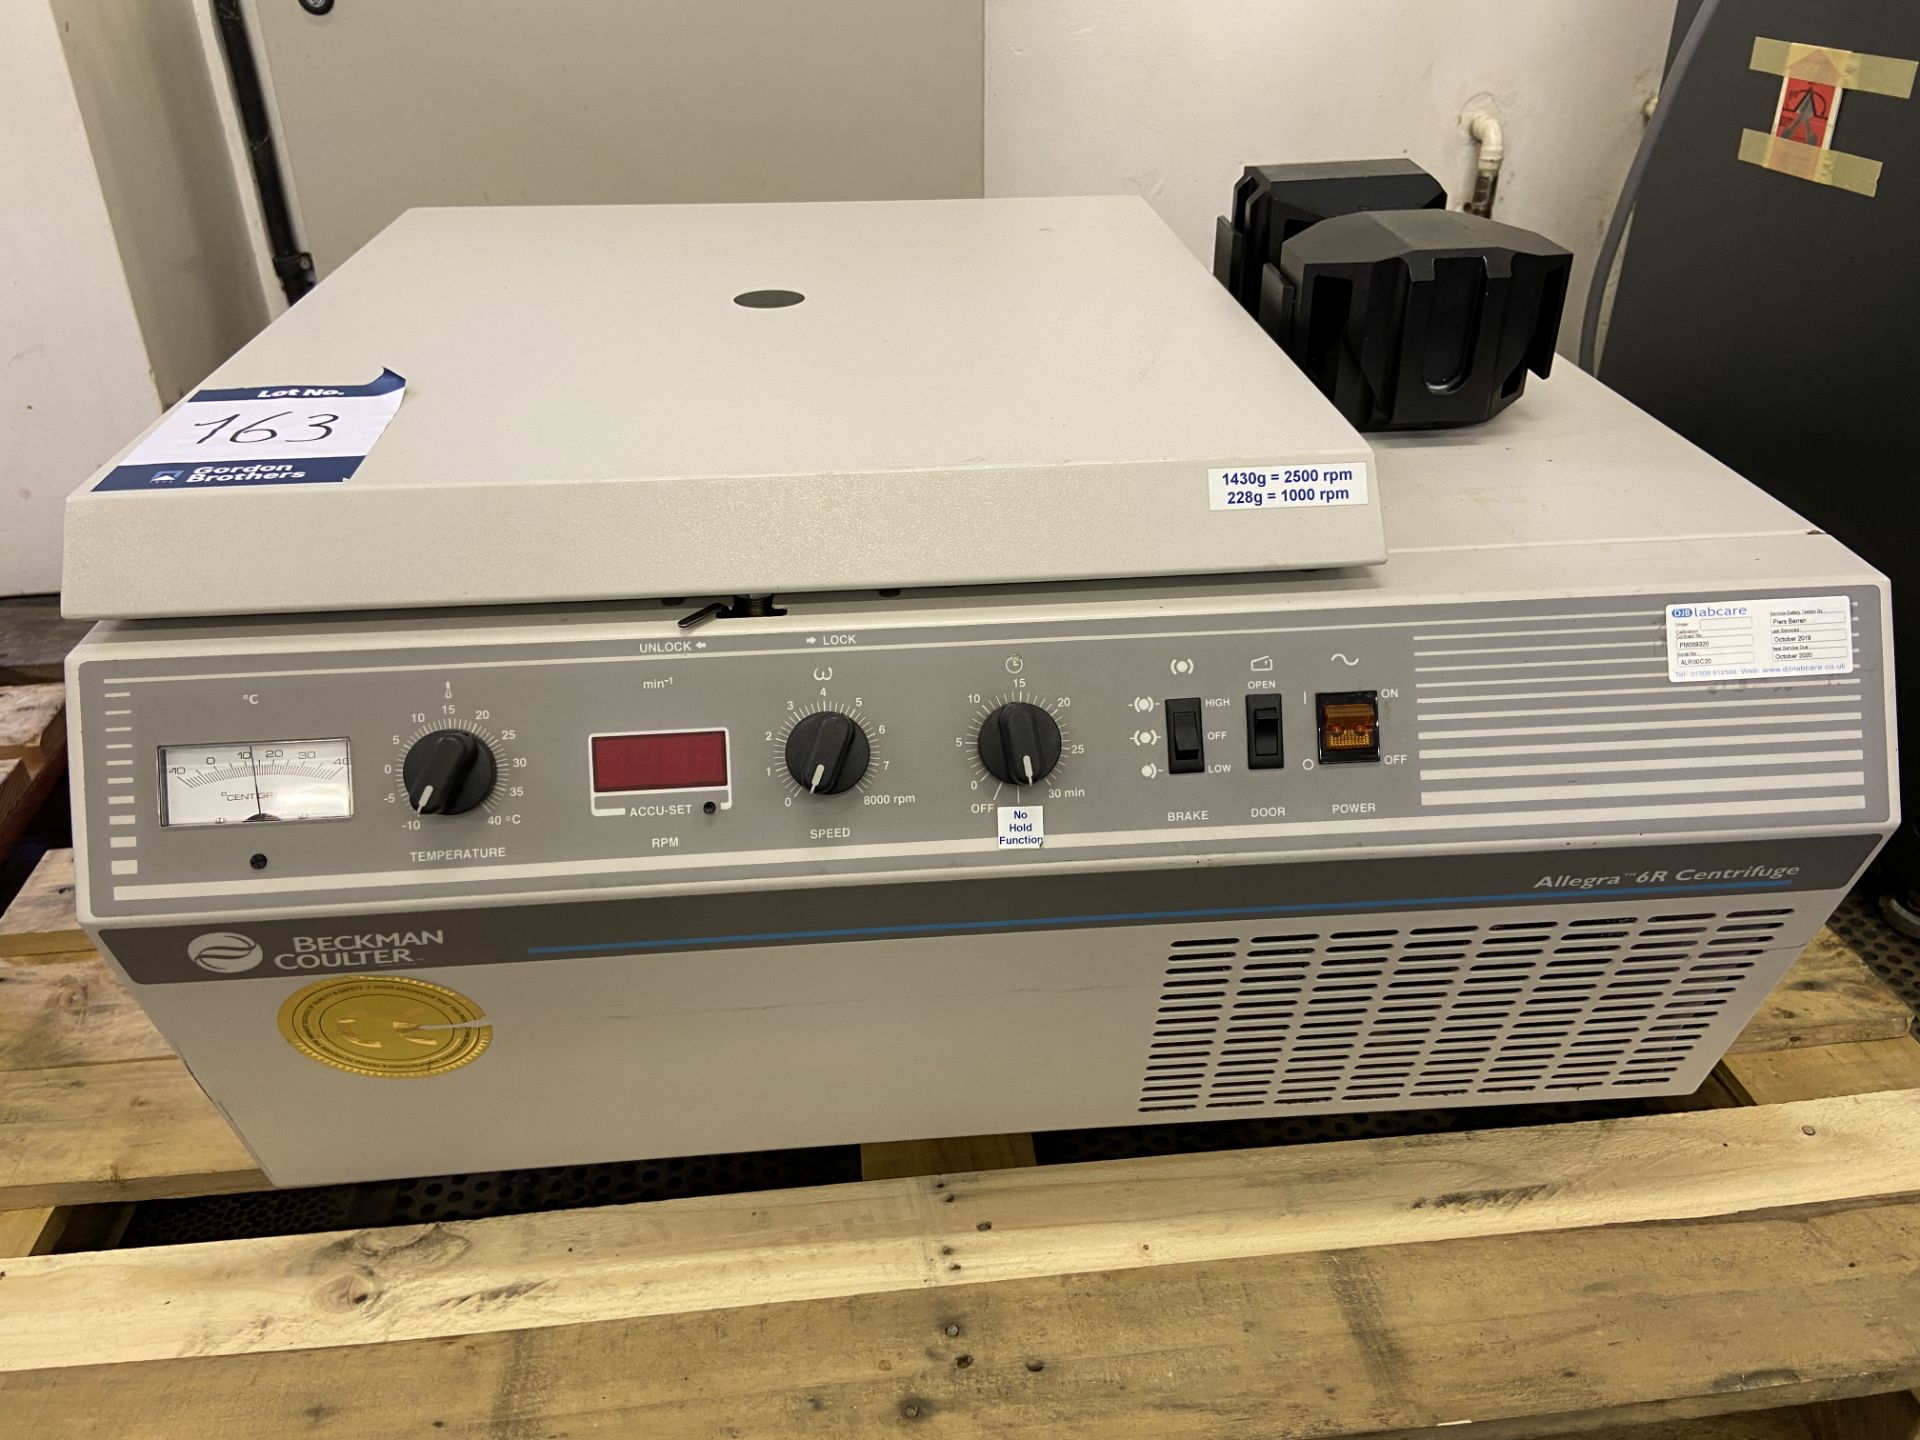 Beckman Coulter Allegra-6R benchtop centrifuge, Serial No. ALR00C20, with 240v power cable